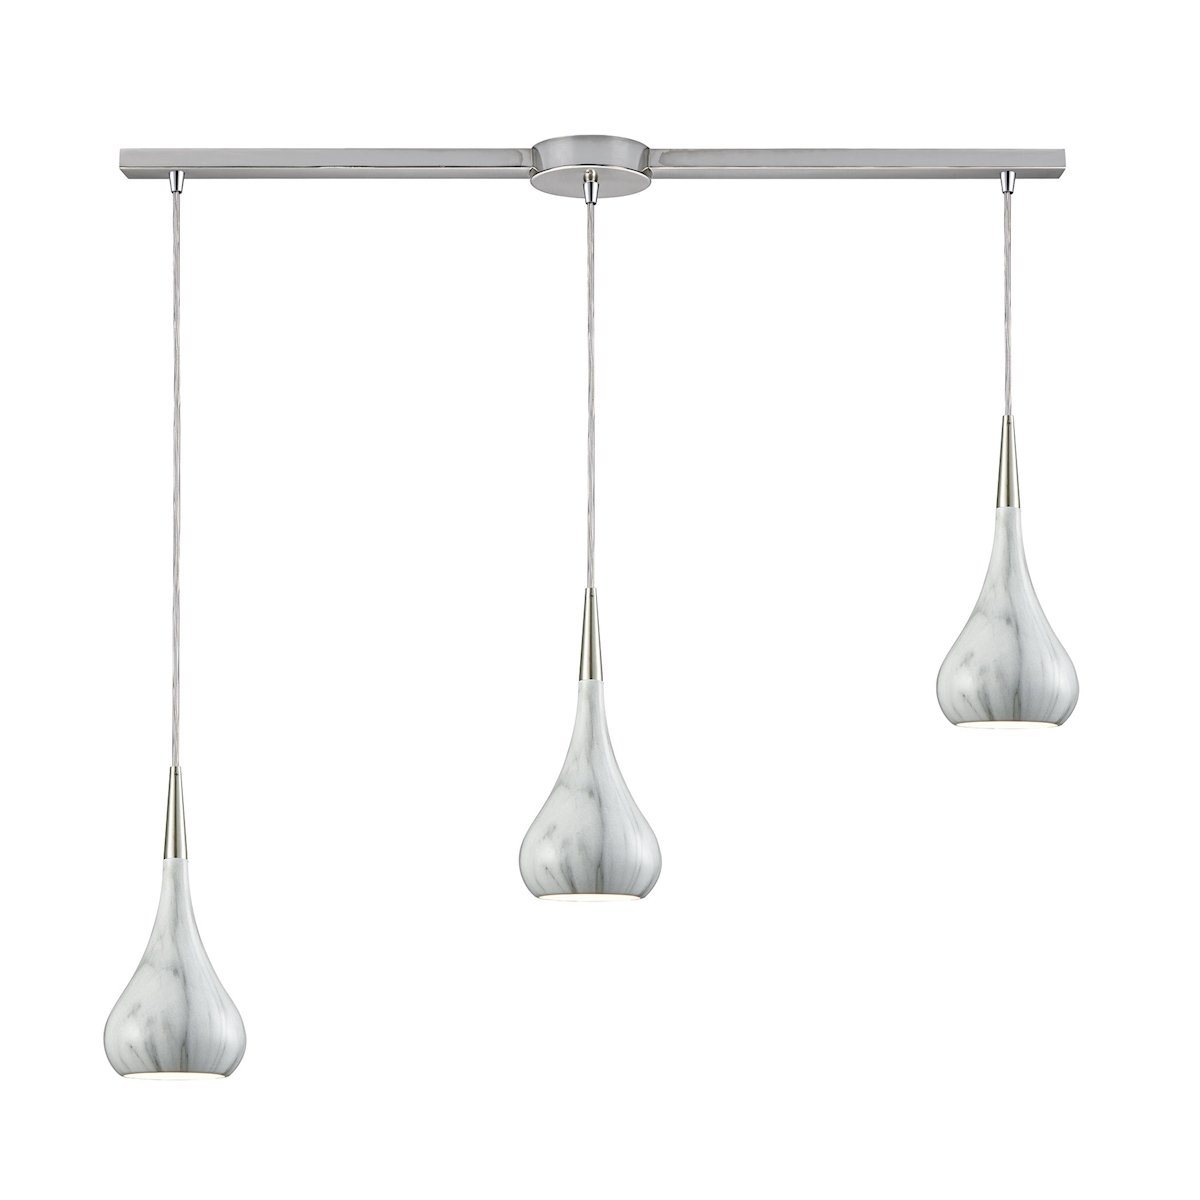 Lindsey 3 Light Linear Bar Fixture In Satin Nickel With Marble Print Shade Ceiling Elk Lighting 